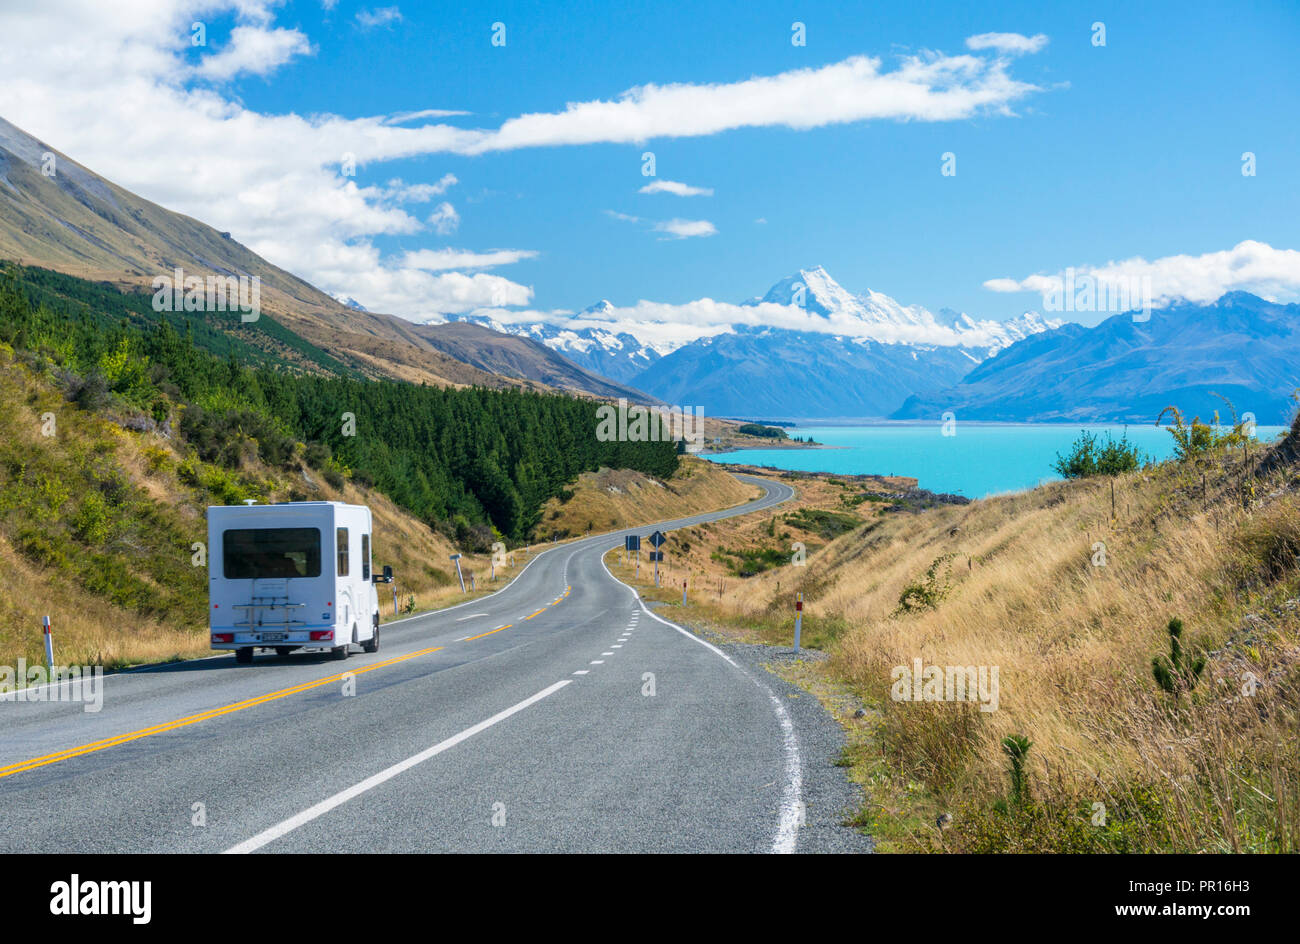 Motorhome (camper van) on a winding road to Mount Cook, Mount Cook National Park, Lake Pukaki, UNESCO, South Island, New Zealand Stock Photo